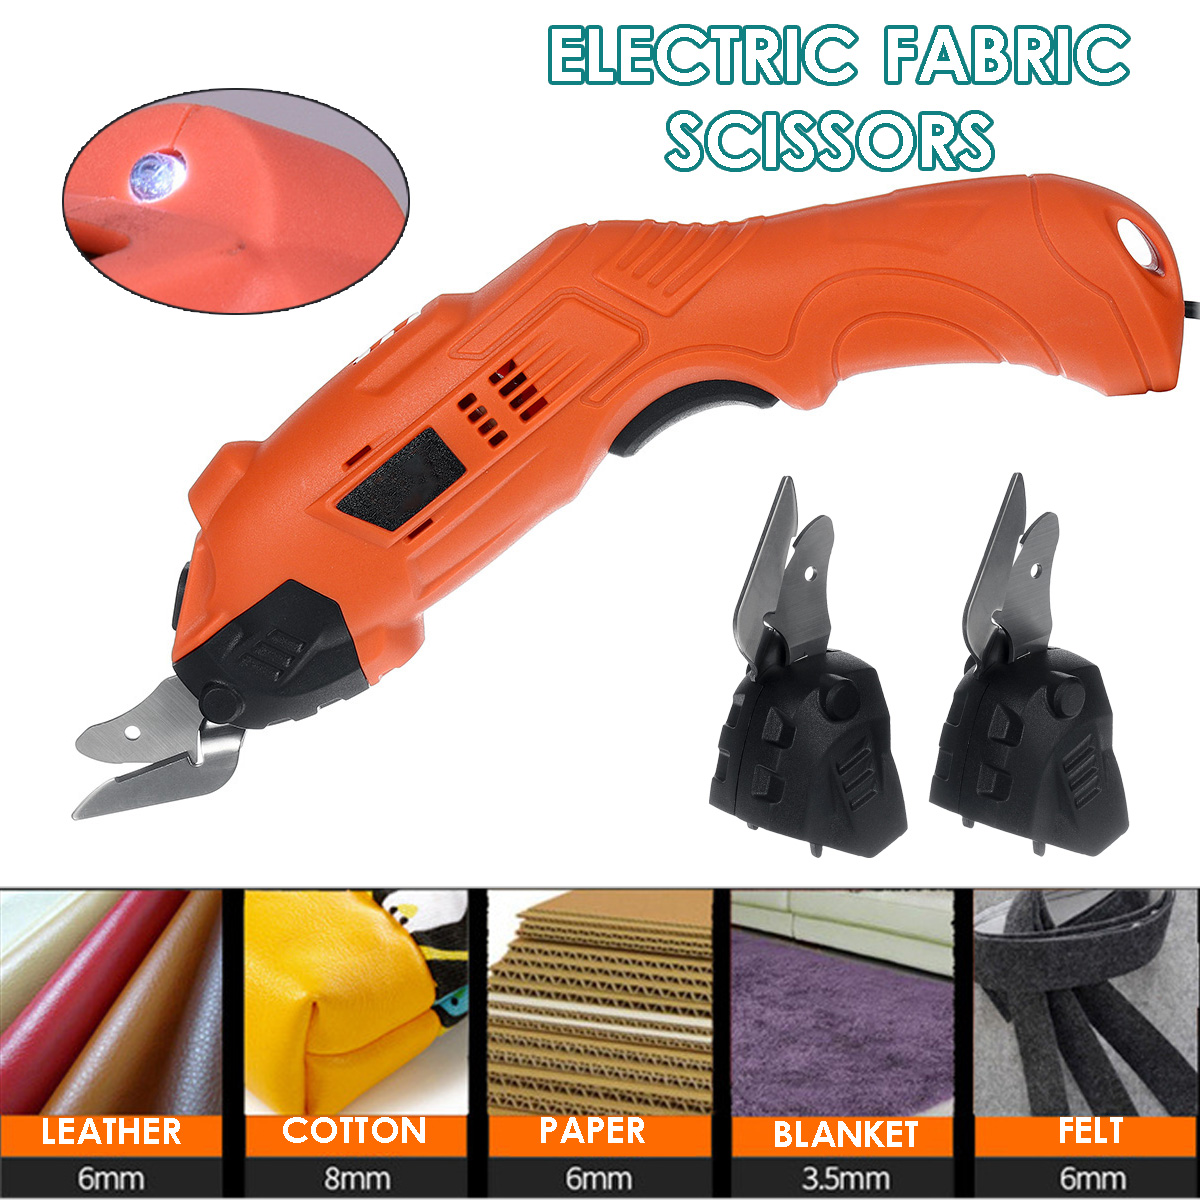 Potable-Electric-Scissors-Household-Leather-Fabric-Crafts-Cutting--2-Blades-1714908-2